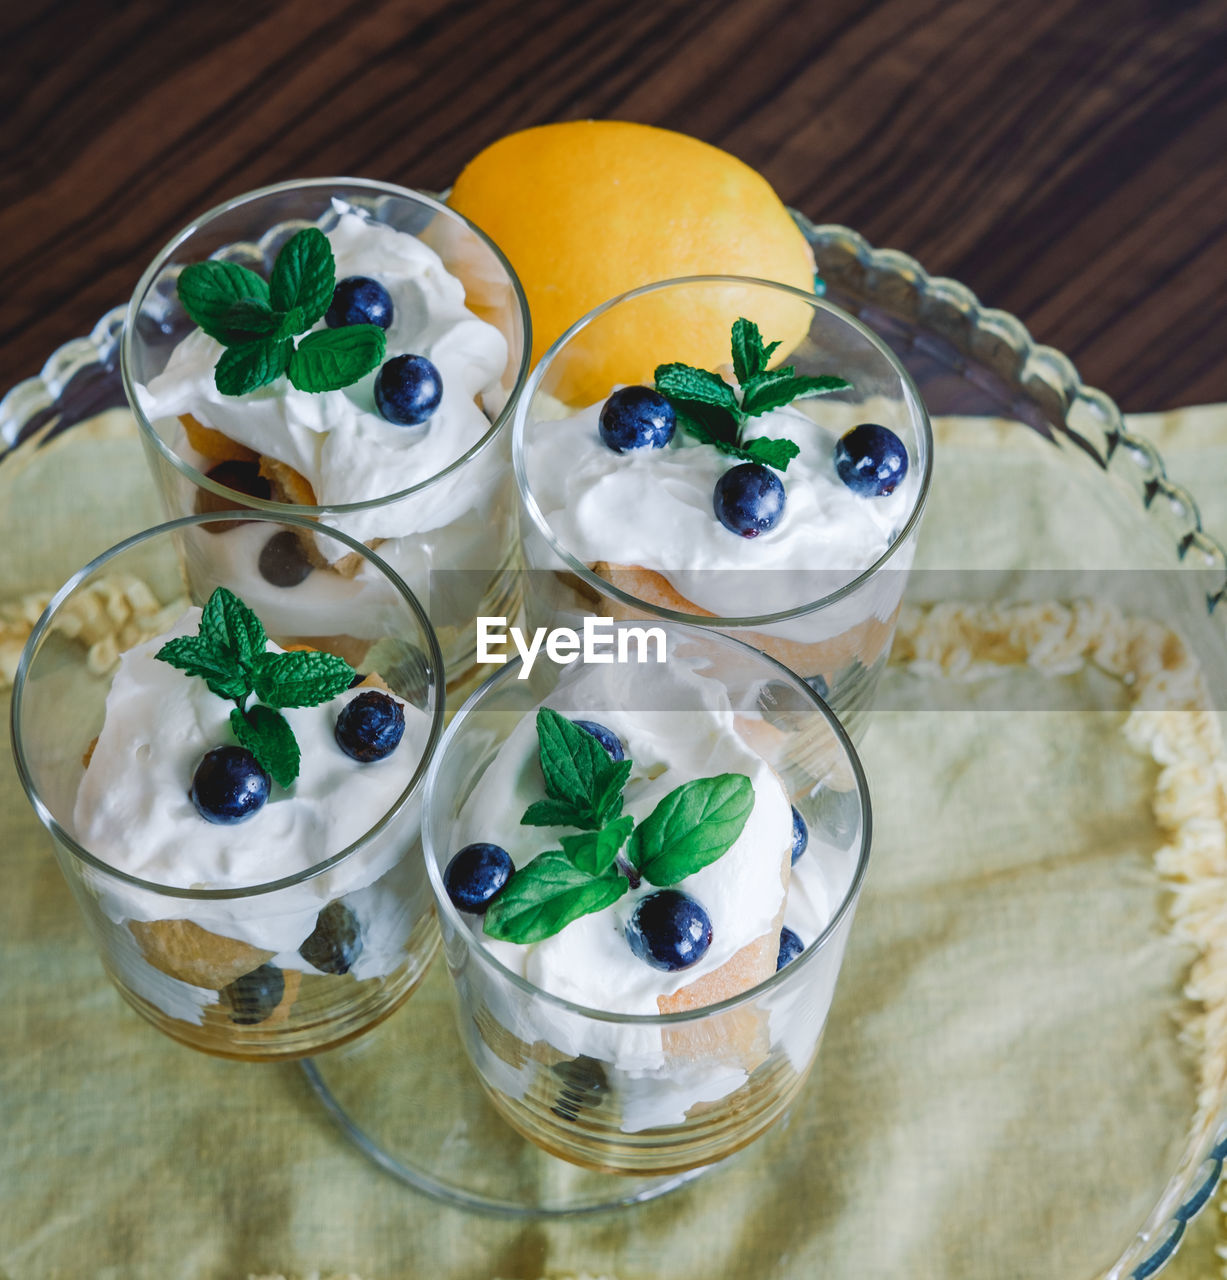 Homemade tiramisu with lemons served on table. top view of delicious dessert in glass cups.